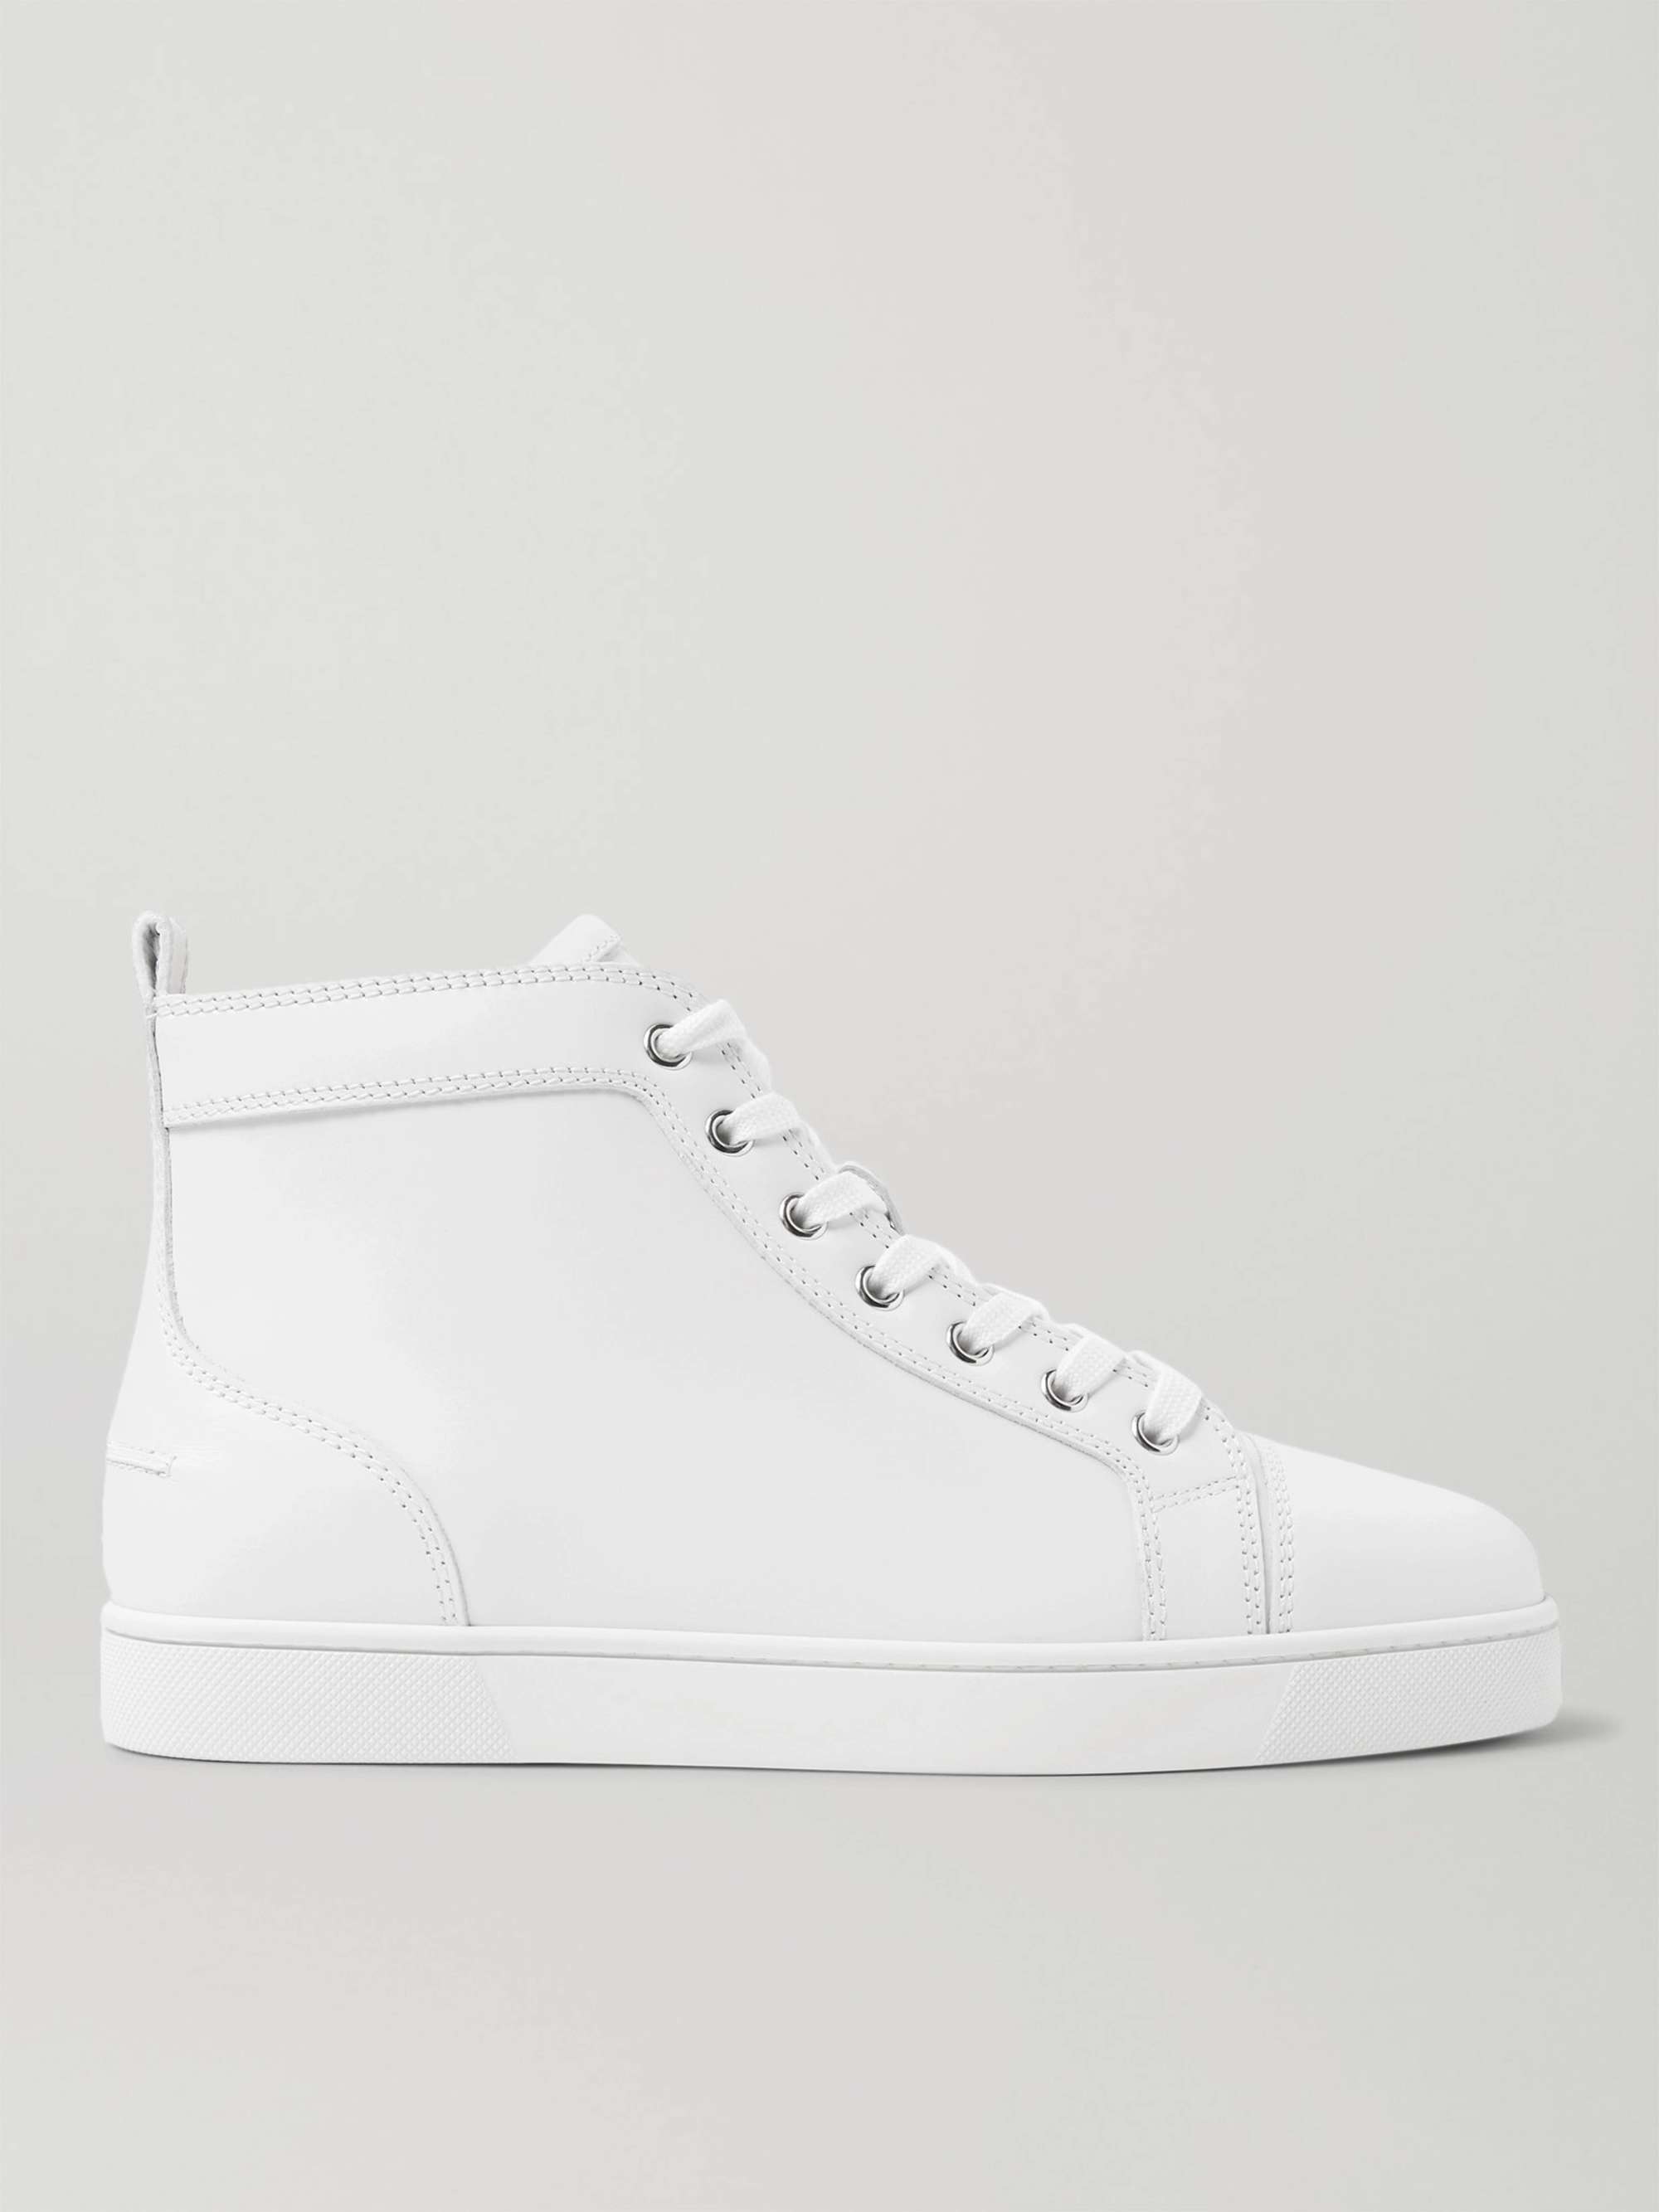 CHRISTIAN LOUBOUTIN Louis Leather High-Top Sneakers | MR PORTER